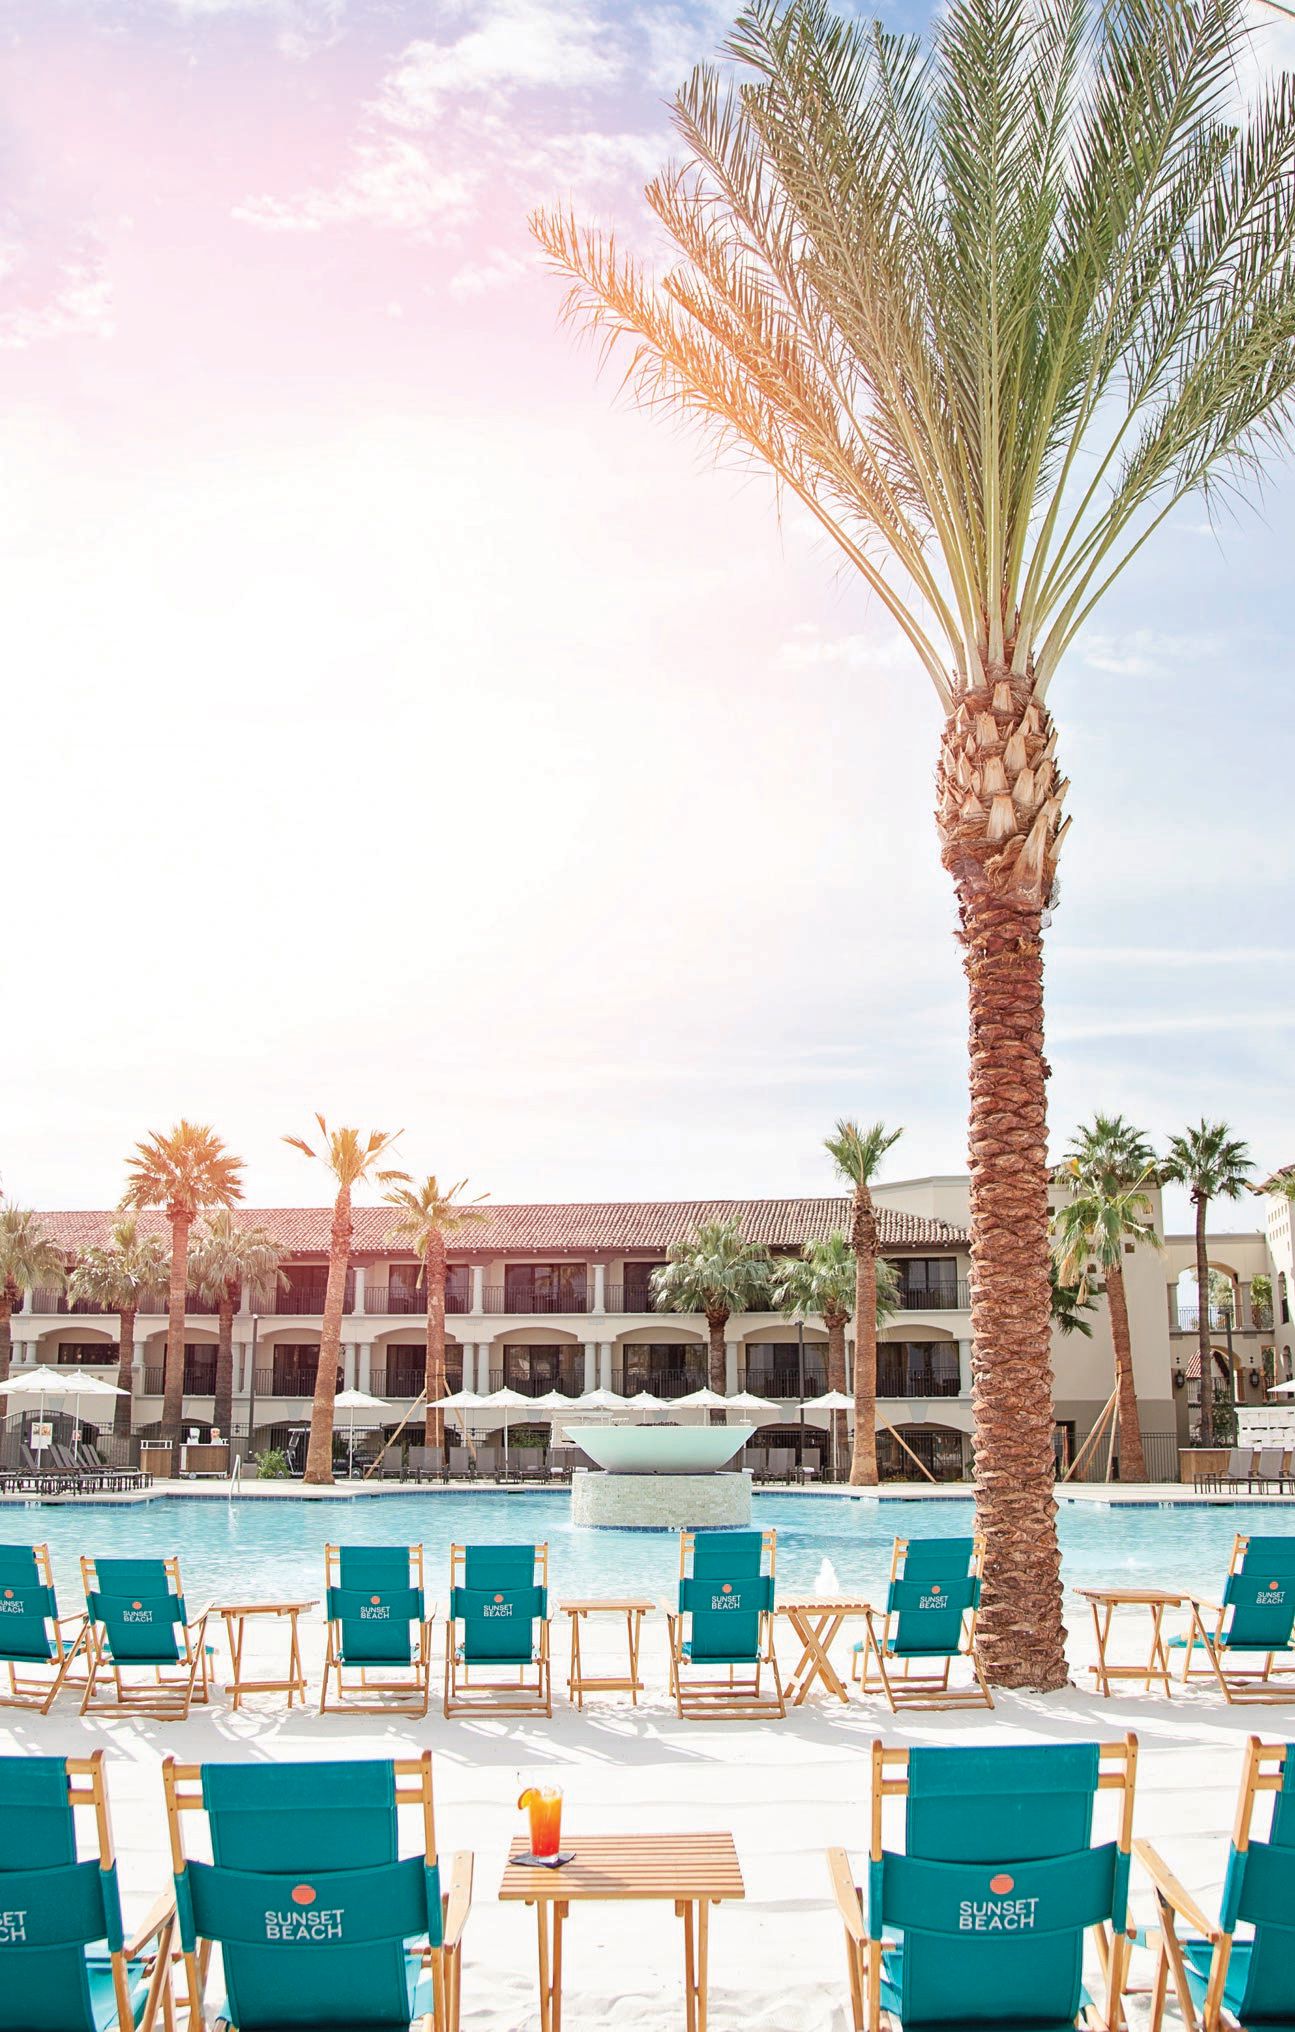 The sun rises at Sunset Beach, one of six pools at the Fairmont Scottsdale Princess. Th is unlikely oasis sits on 9,000 square feet of powdery white sand. PHOTO COURTESY OF BRANDS